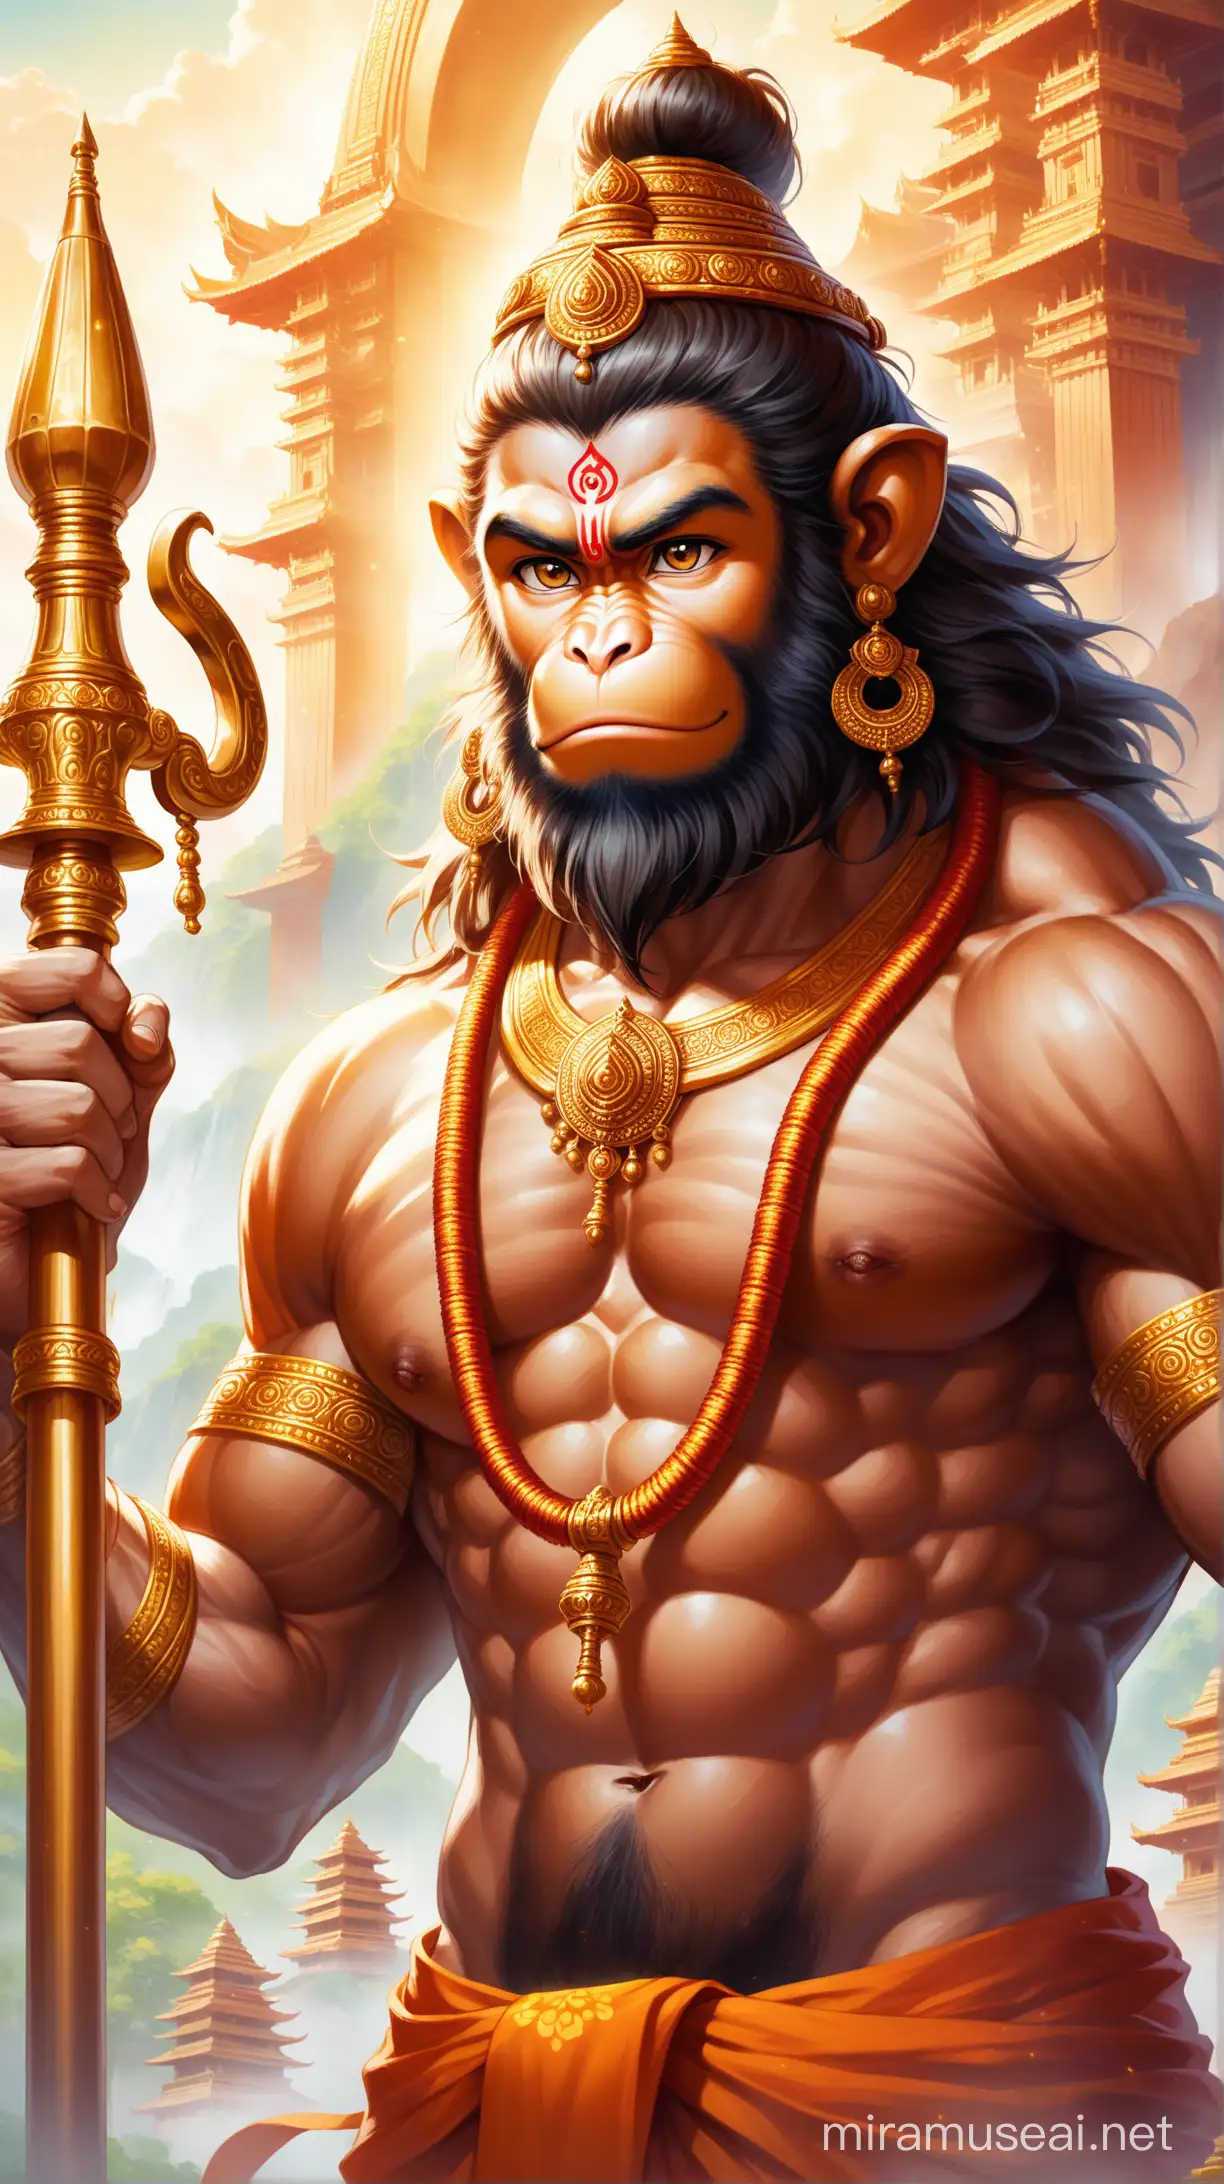 A striking, highly detailed, and realistic close-up portrait of Lord Hanuman, the divine monkey god. He has a strong, muscular face with a full beard and a gentle, wise expression. His eyes are open, revealing a deep sense of devotion and compassion. His hair is tousled, and his forehead is adorned with a sacred mark. He wears a traditional dhoti and is holding a mace in his right hand. The background is a soft, blurred, and subtle representation of a temple, adding a sense of spirituality to the image.